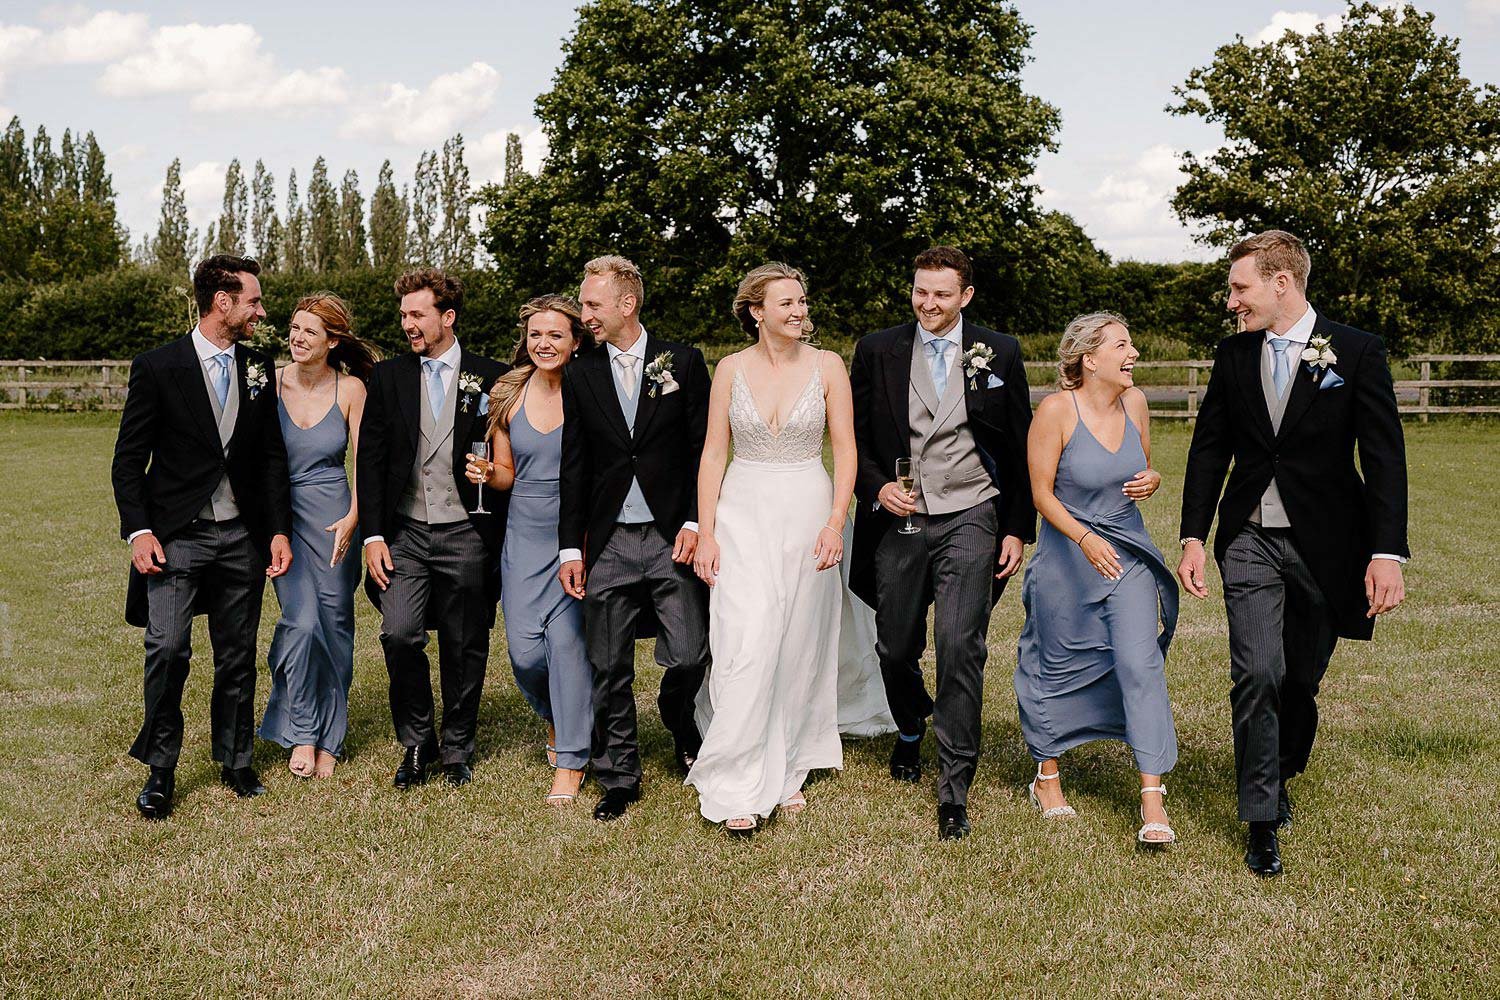 Oxfordshire and the cotswolds wedding photographer 2022 review071.jpg